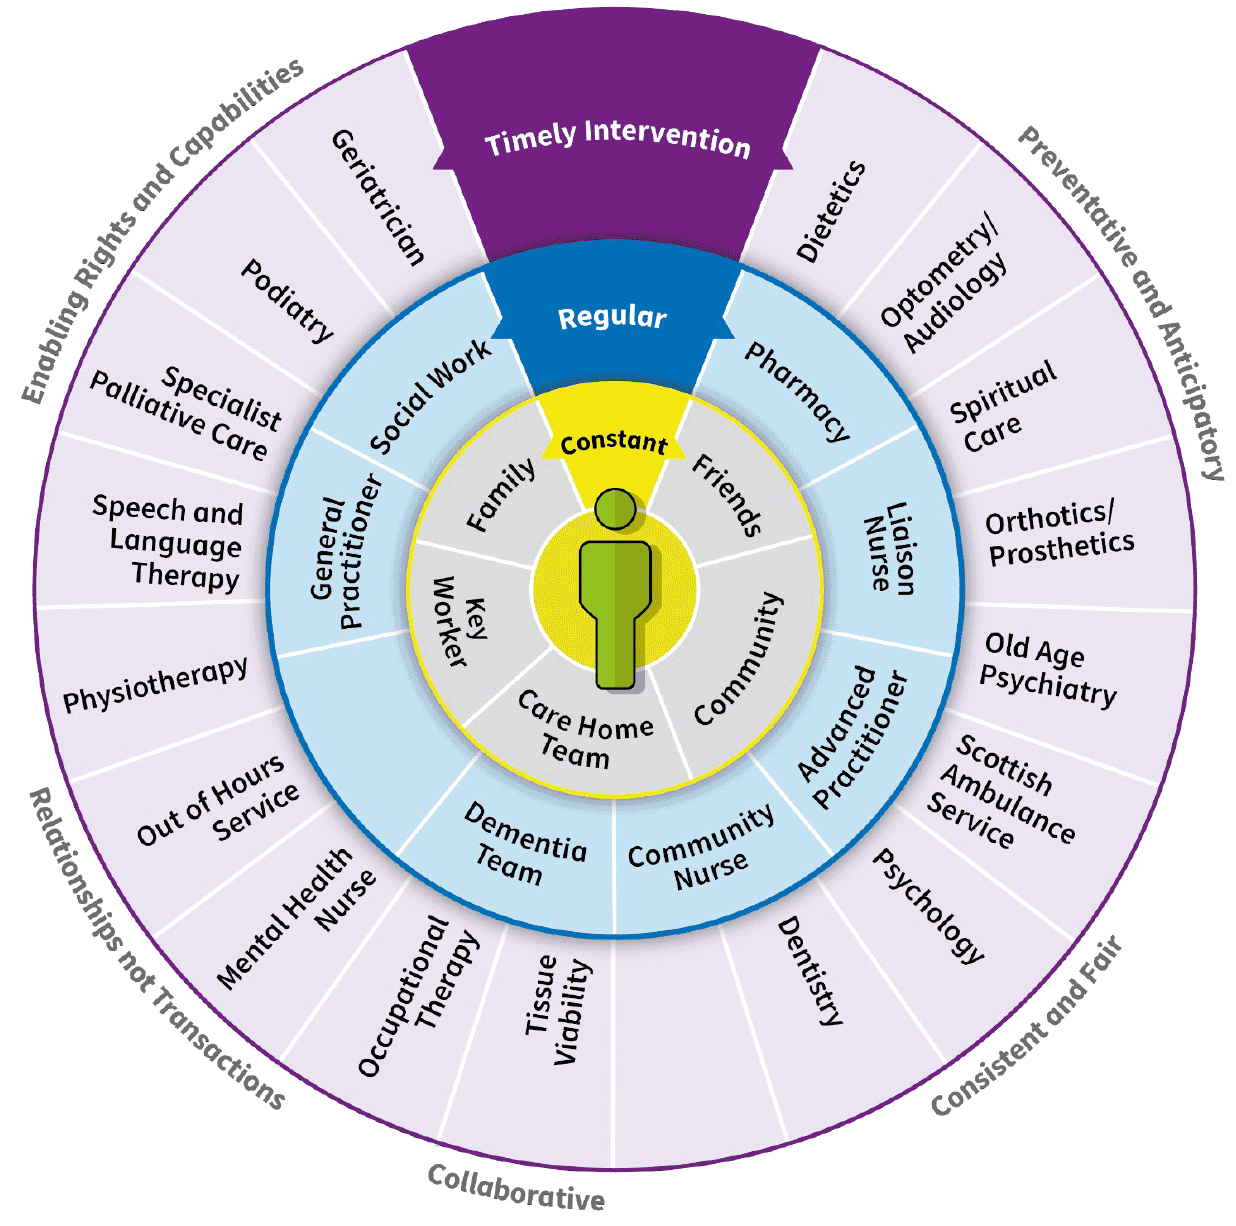 an individual at the centre of 3 concentric wheels made up of professionals who provide constant, regular and timely care. Friends and family, the community and the care home team will normally provide constant care and are shown in the inner wheel. The middle wheel is made up of professionals who may not be involved on a daily basis, but will often be providing regular healthcare advice and reviews over many weeks, months and sometimes years. For example Social Workers, or Community Nurses. The outer wheel represents a range of other health and care professionals who will provide proactive timely interventions to support the individual. For example Physiotherapist, Geriatrician or Mental Health nurse.